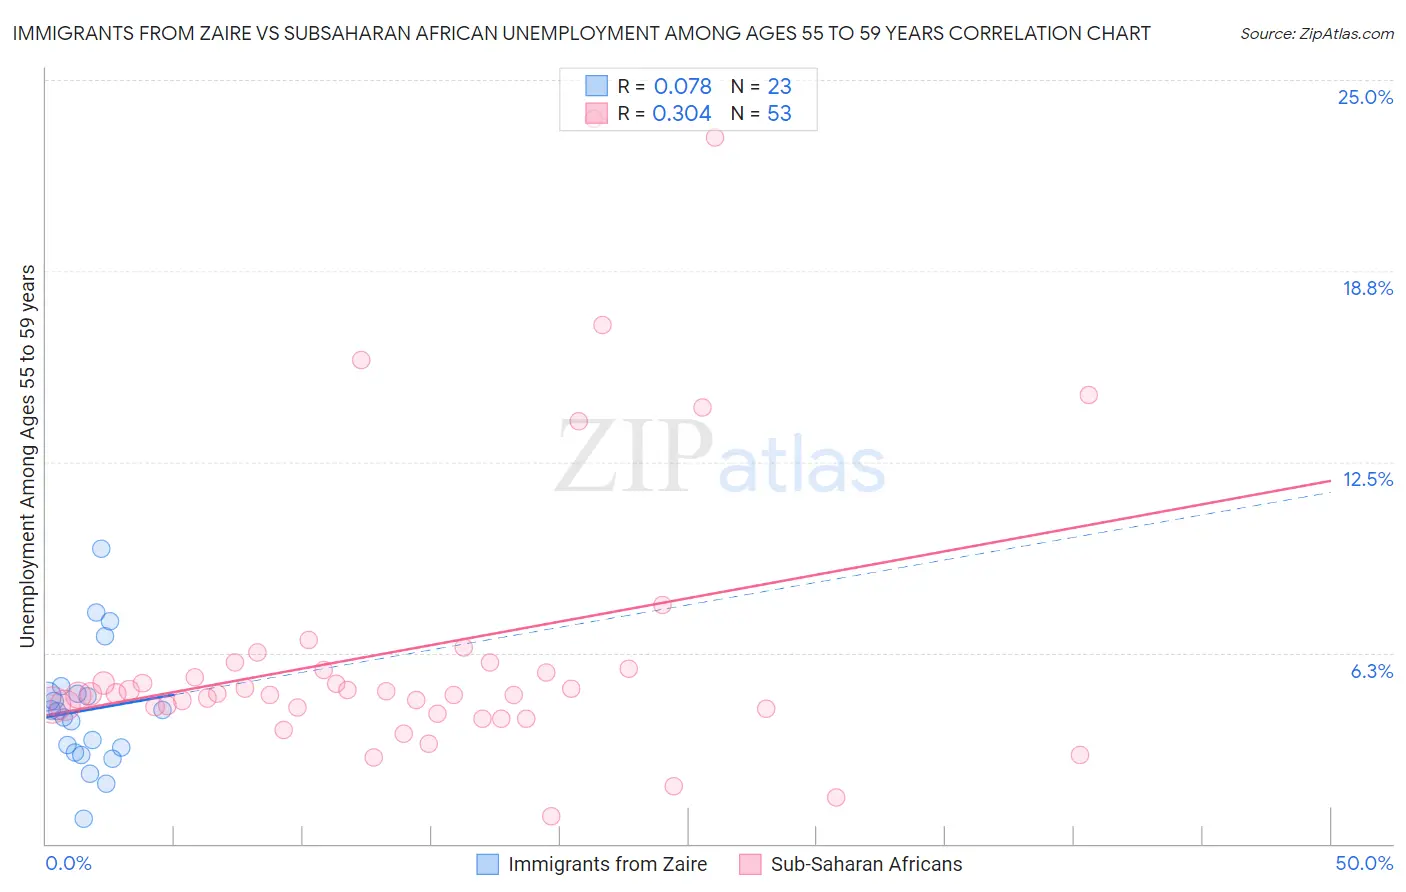 Immigrants from Zaire vs Subsaharan African Unemployment Among Ages 55 to 59 years